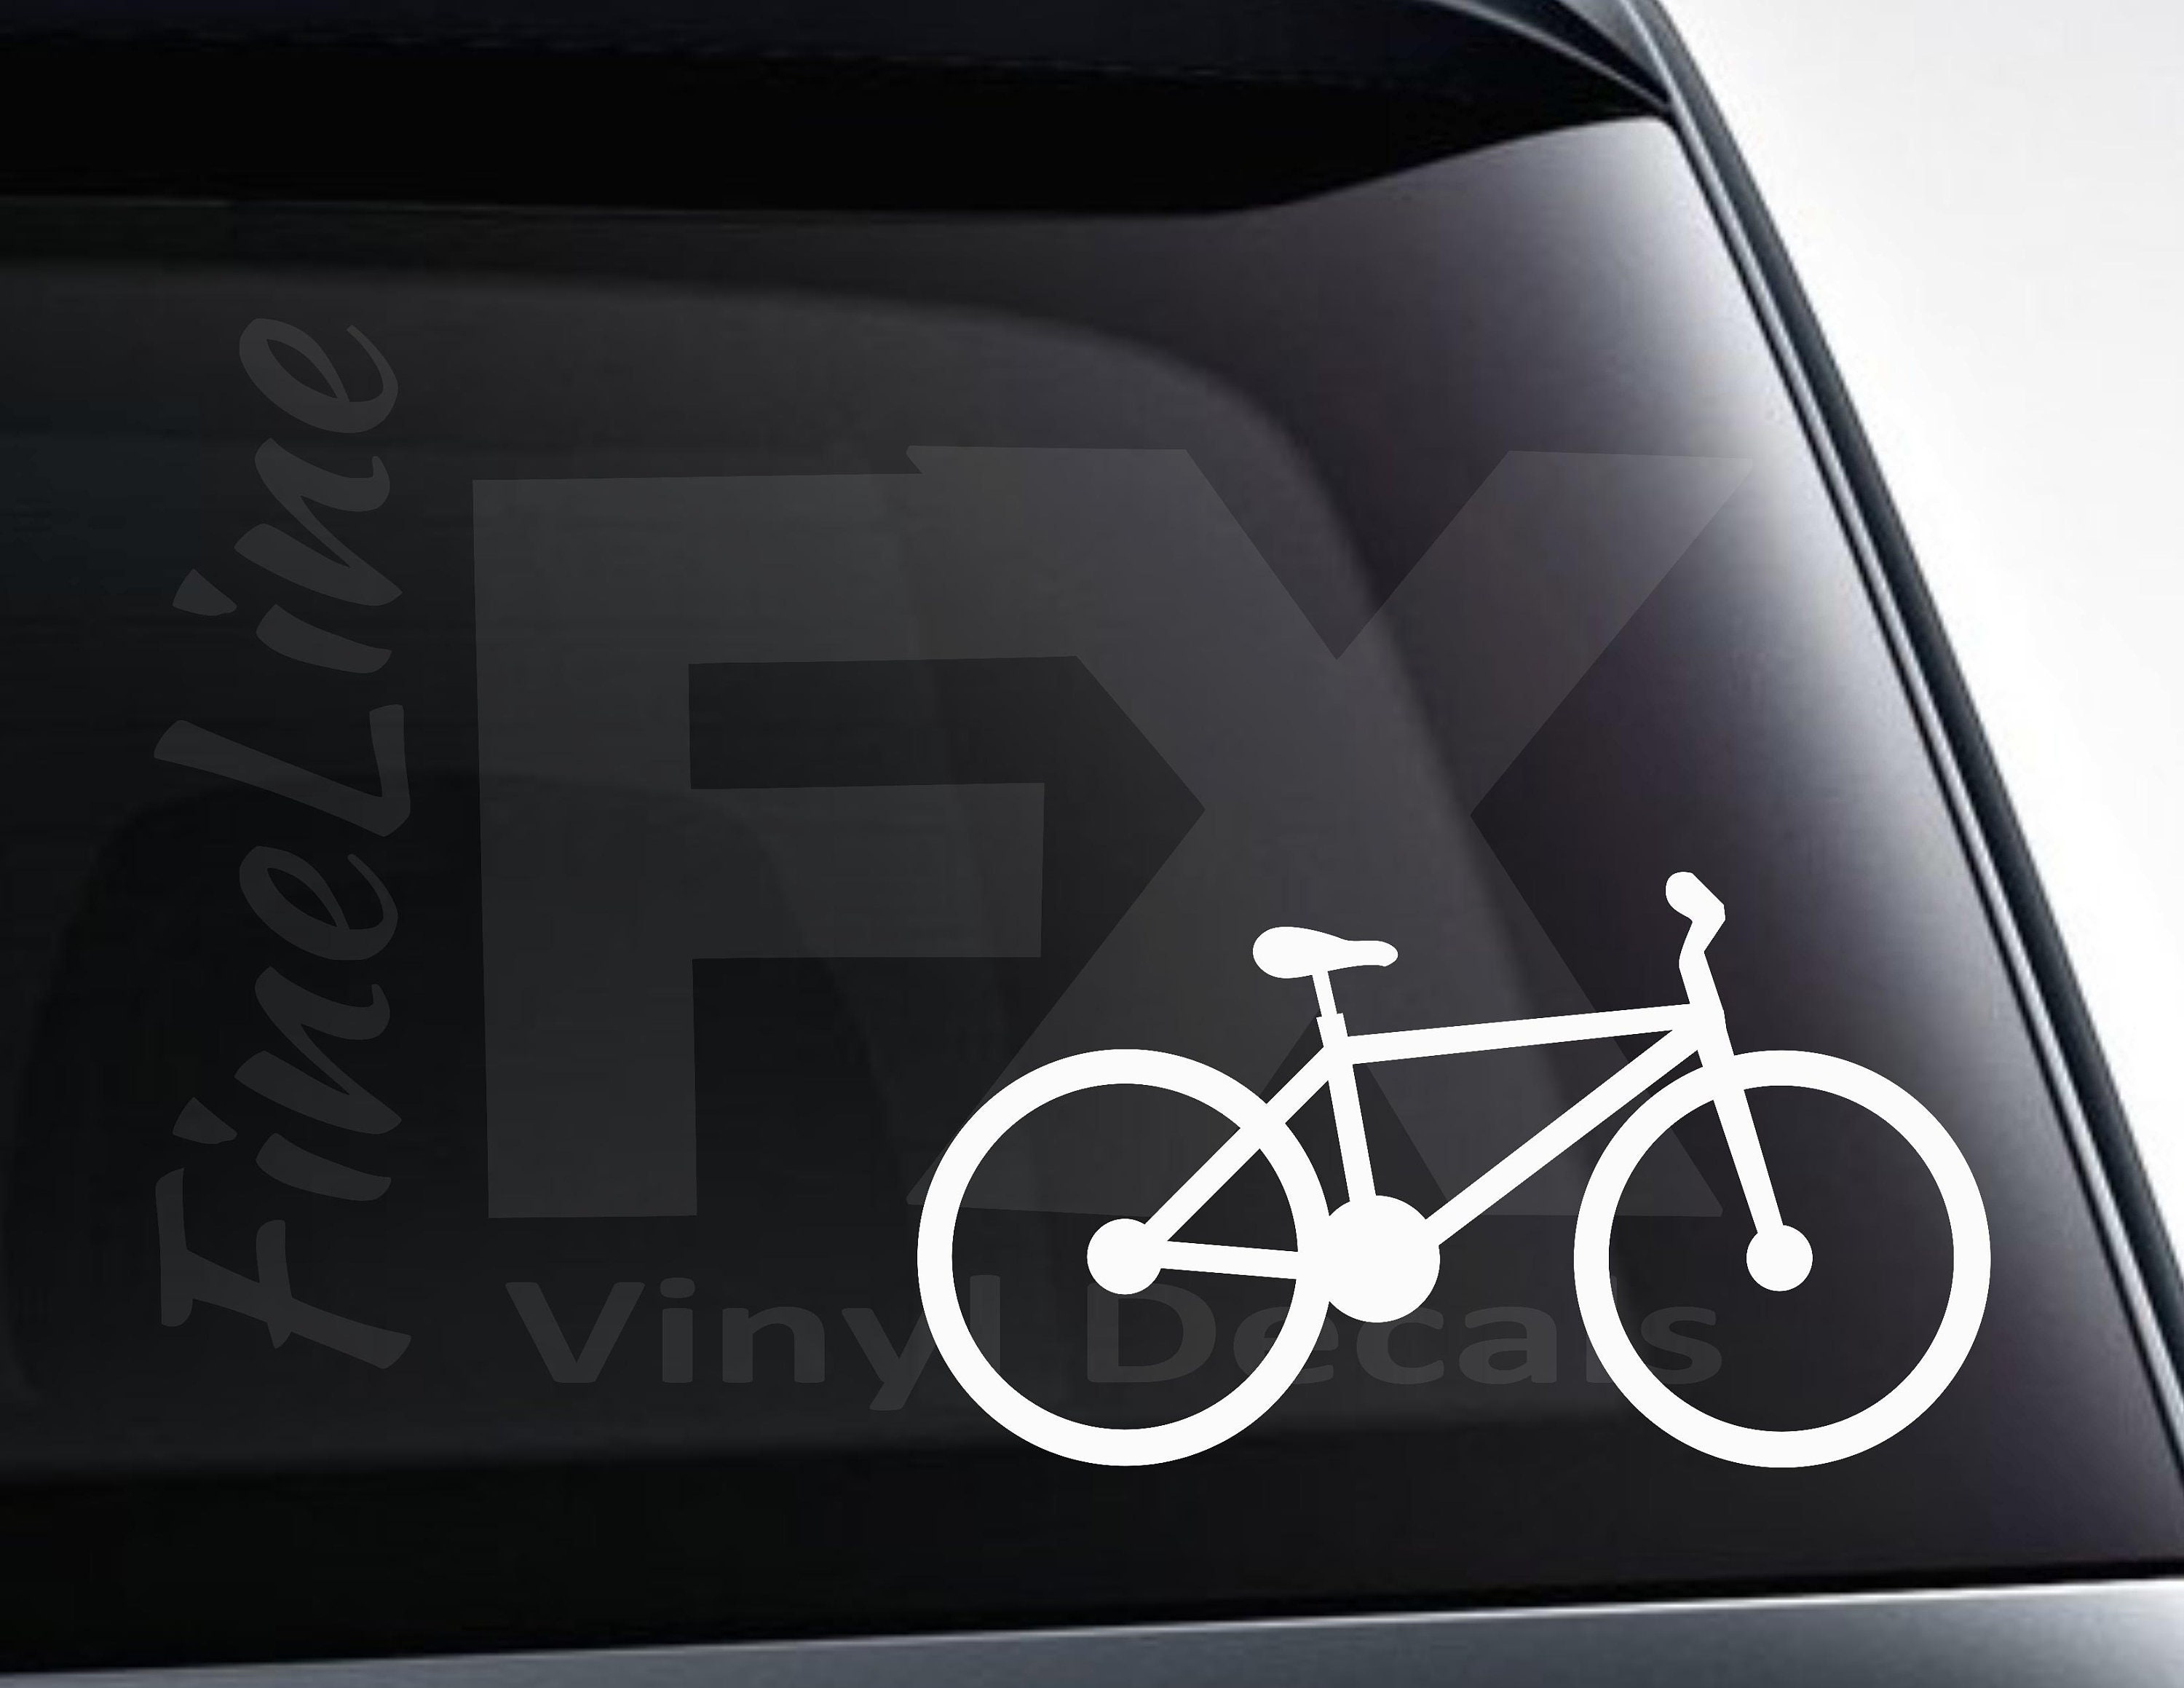 FUN CAR STICKER / DECAL I LOVE CYCLING REPLACE OLD TAX DISC 1 FREE NEW 